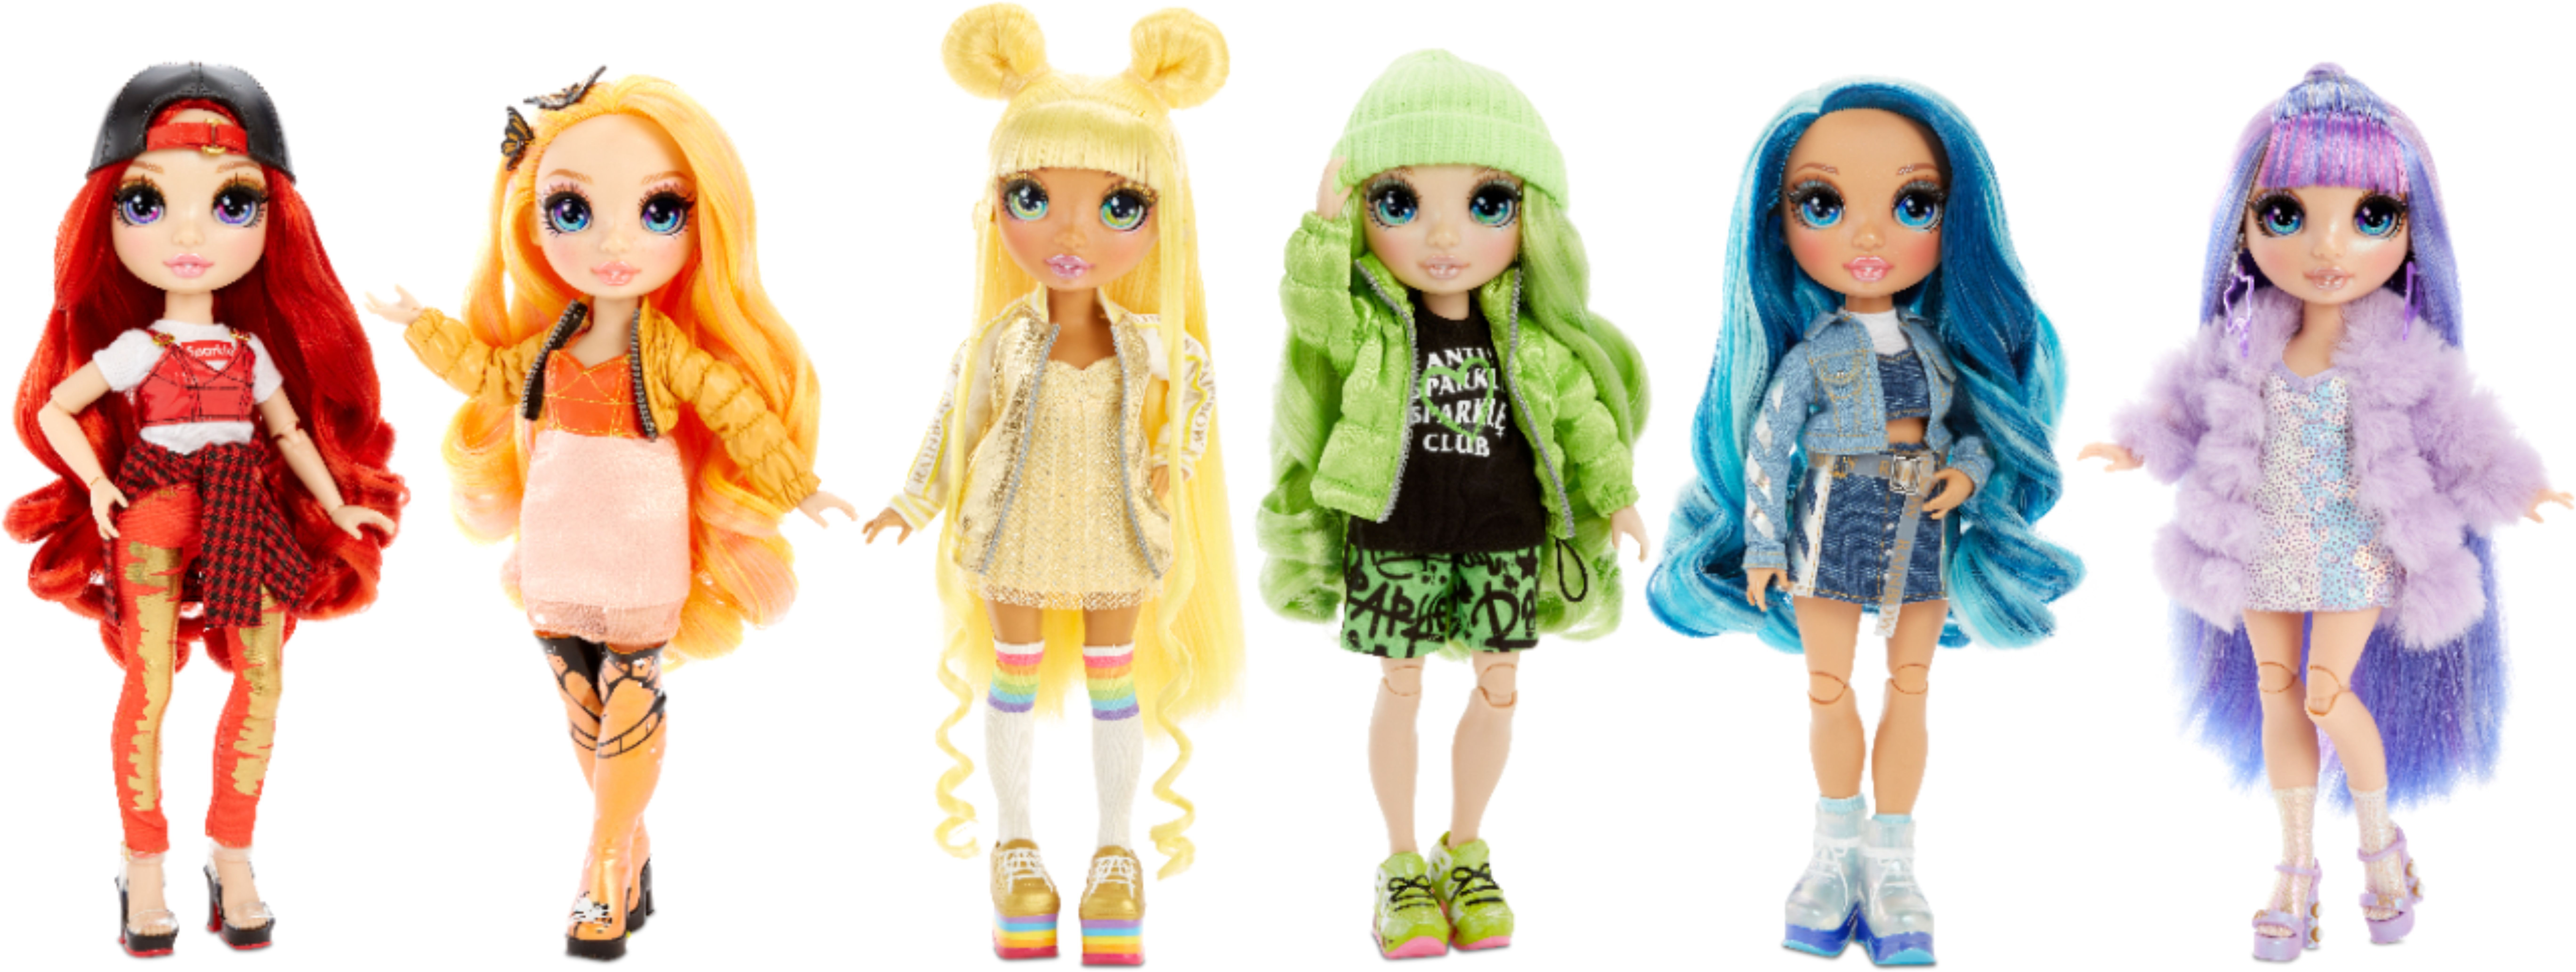 Rainbow High Skyler Bradshaw Blue Fashion Doll with 2 Outfits By Brand, Company, Character Other Brand & Character Dolls